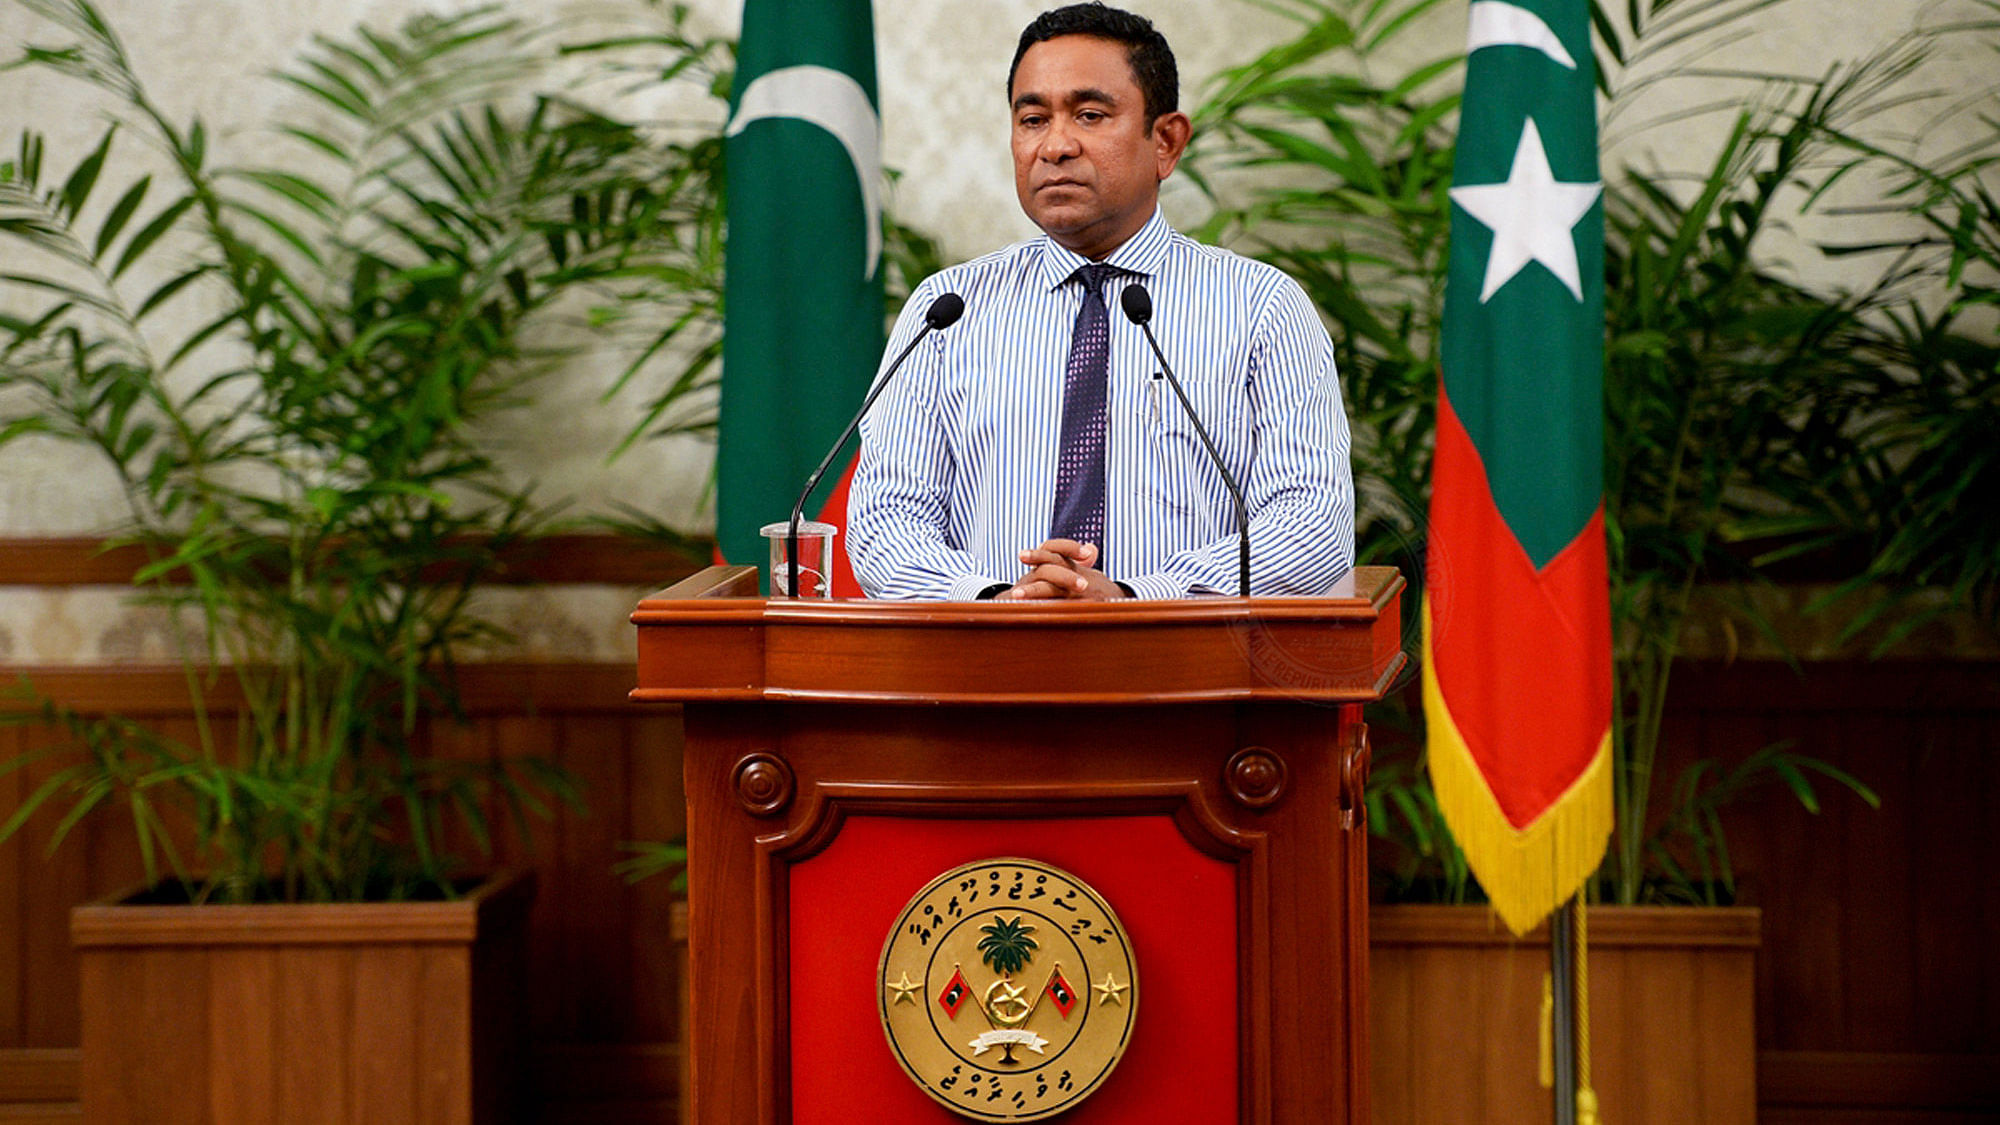 File Photo of Maldives President Yameen Abdul Gayoom addressing the nation in Male, Maldives on 25 October  2015. (Photo: AP)